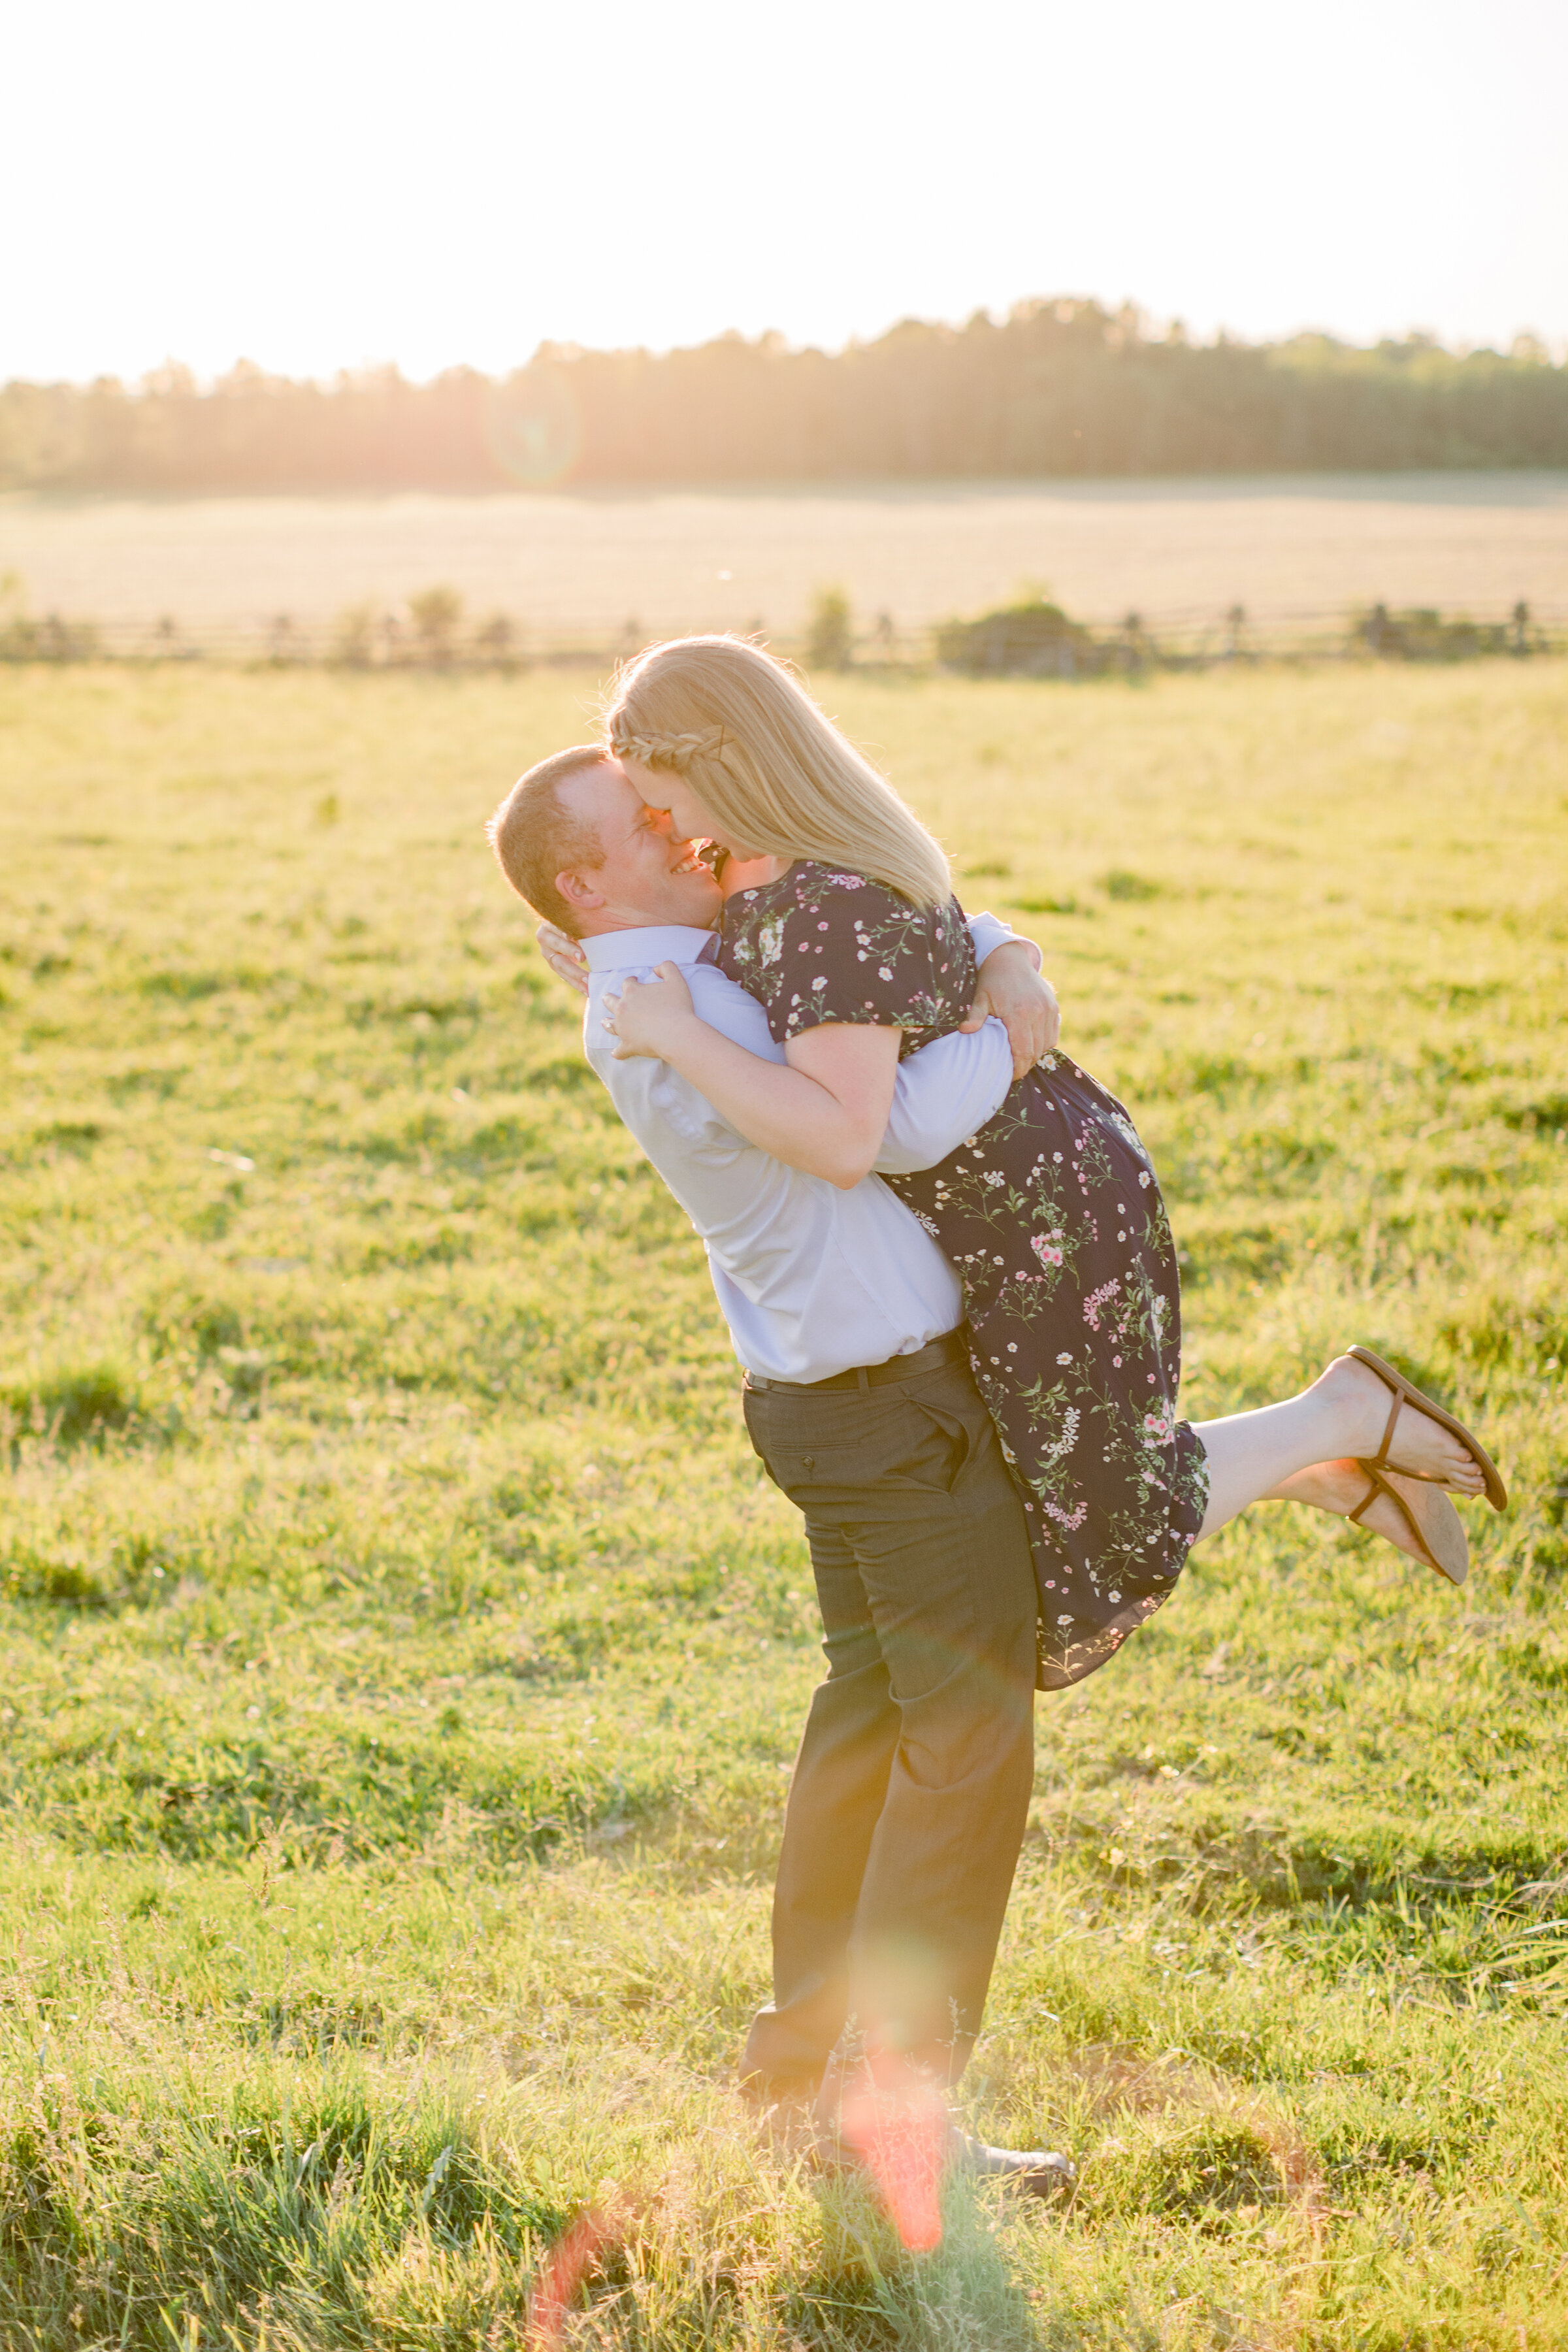  The groom lifts his bride as they kiss in a bright sun filled engagement session by Chelsea Mason Photography. Professional engagement photographer country engagement session country client attire inspiration cowgirl boots outdoor engagement session